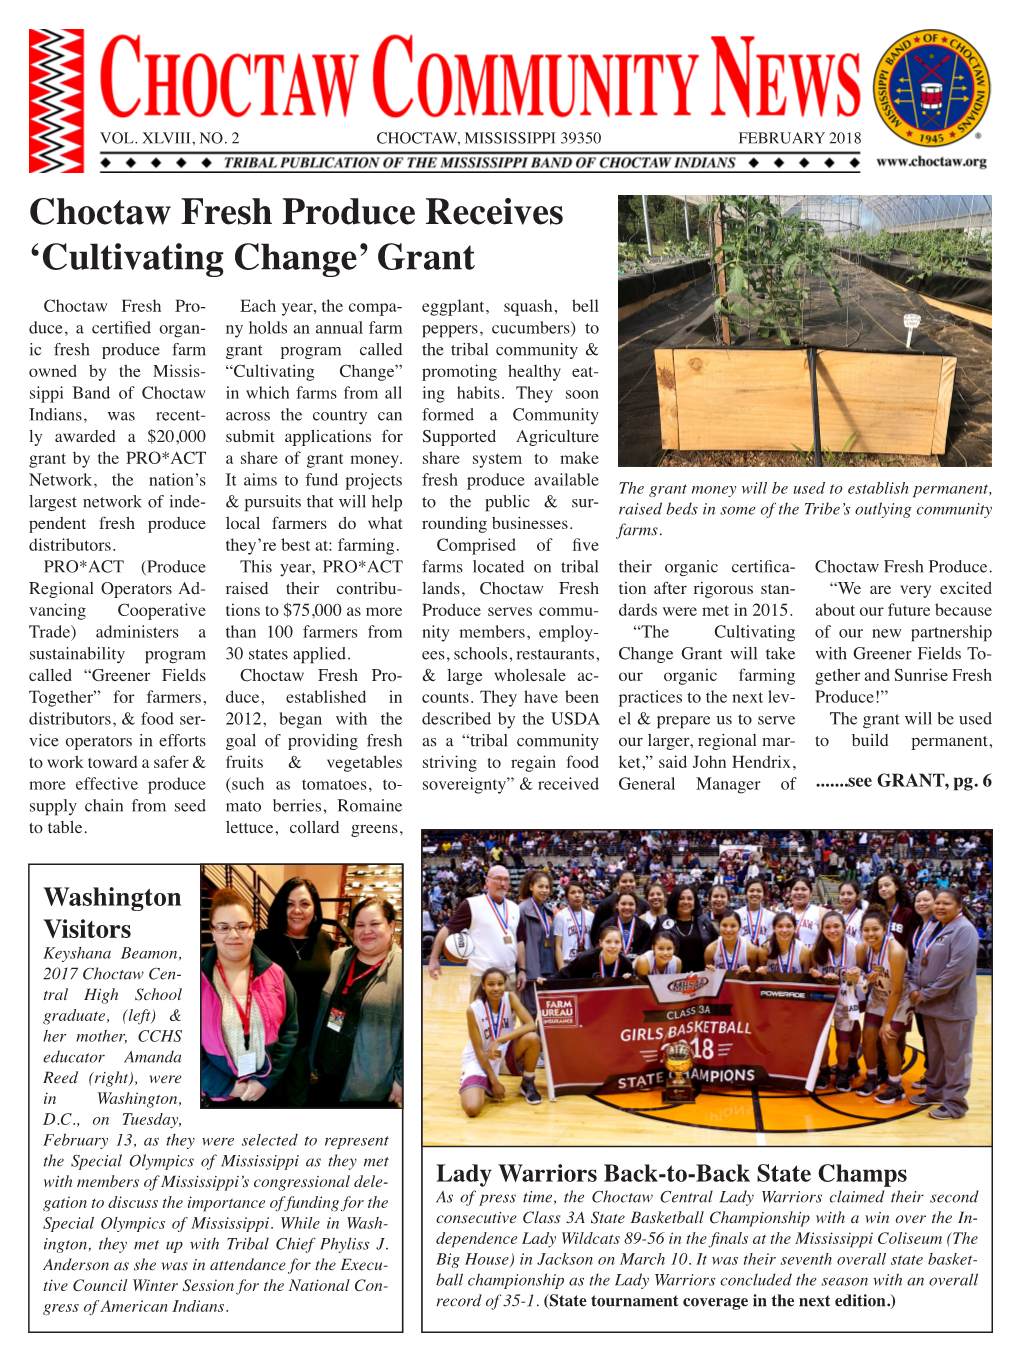 Choctaw Fresh Produce Receives 'Cultivating Change' Grant